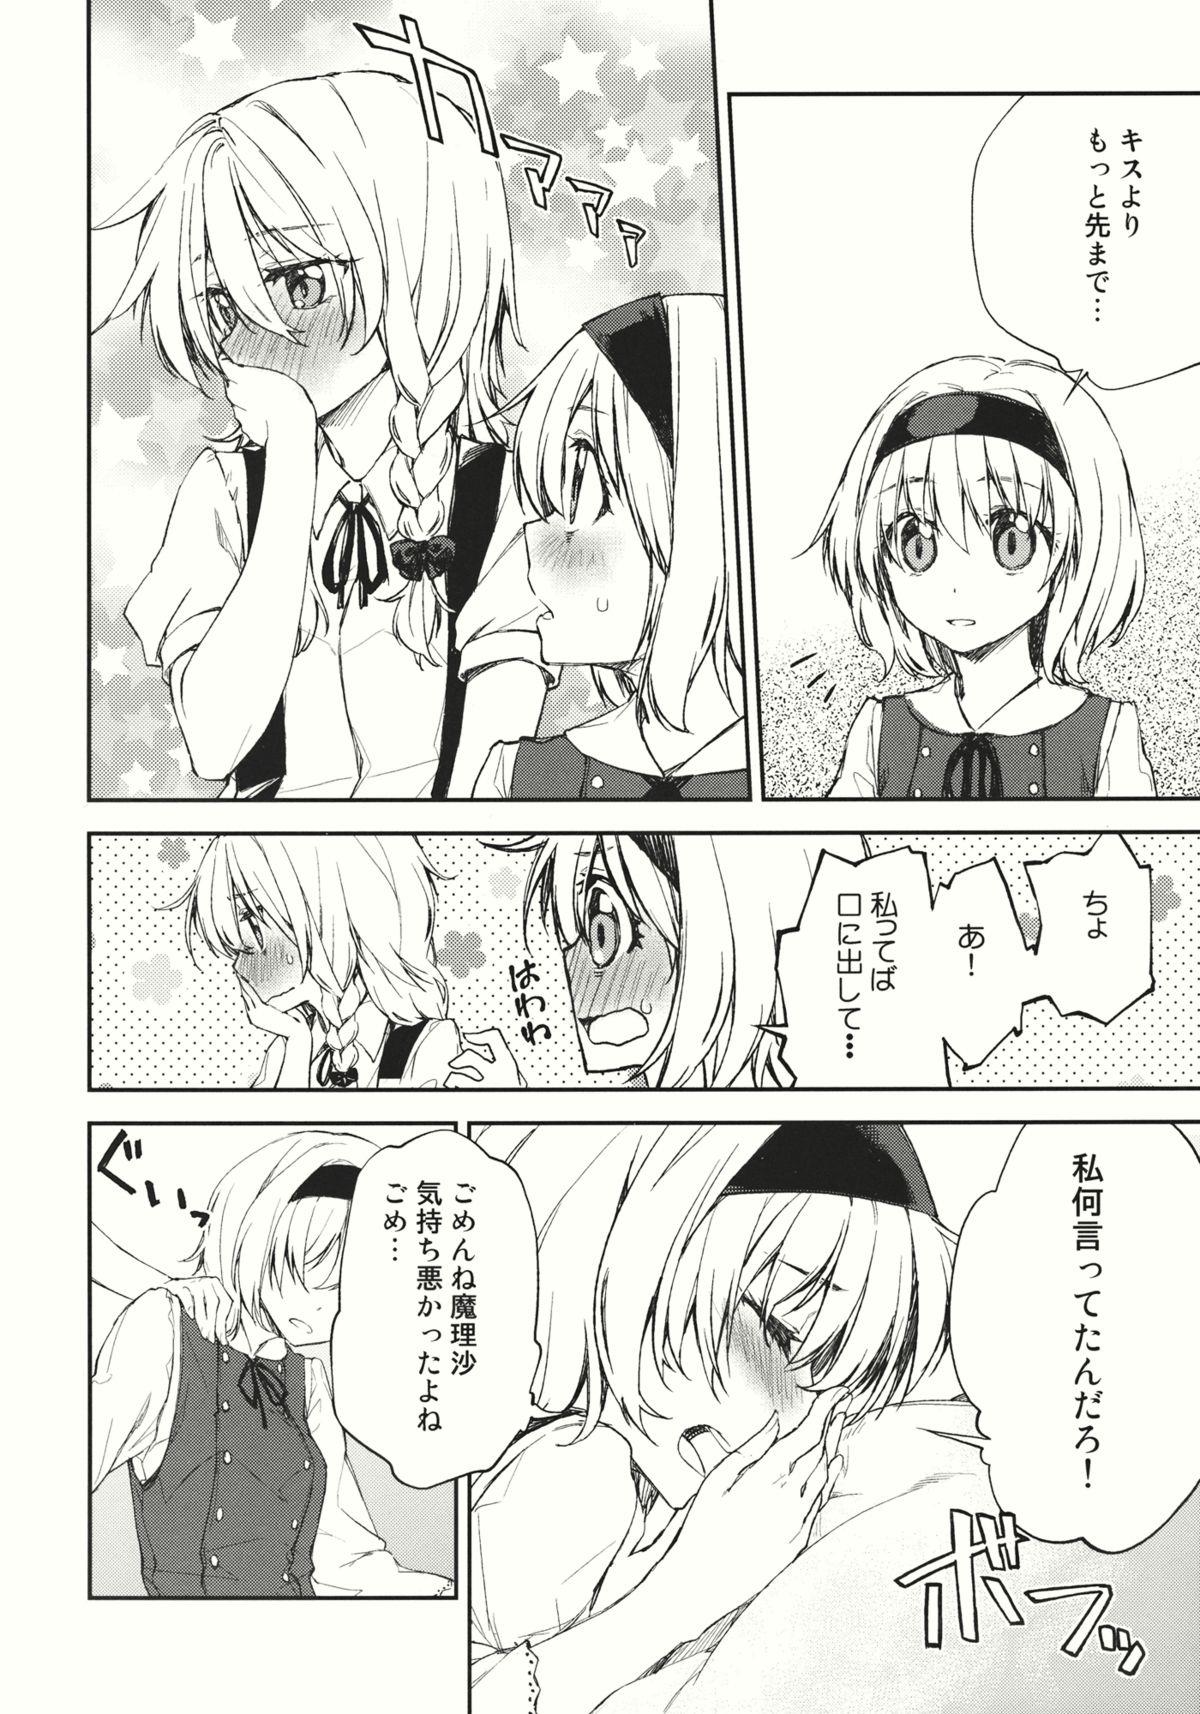 Young Tits twinkle star - Touhou project Colombia - Page 10